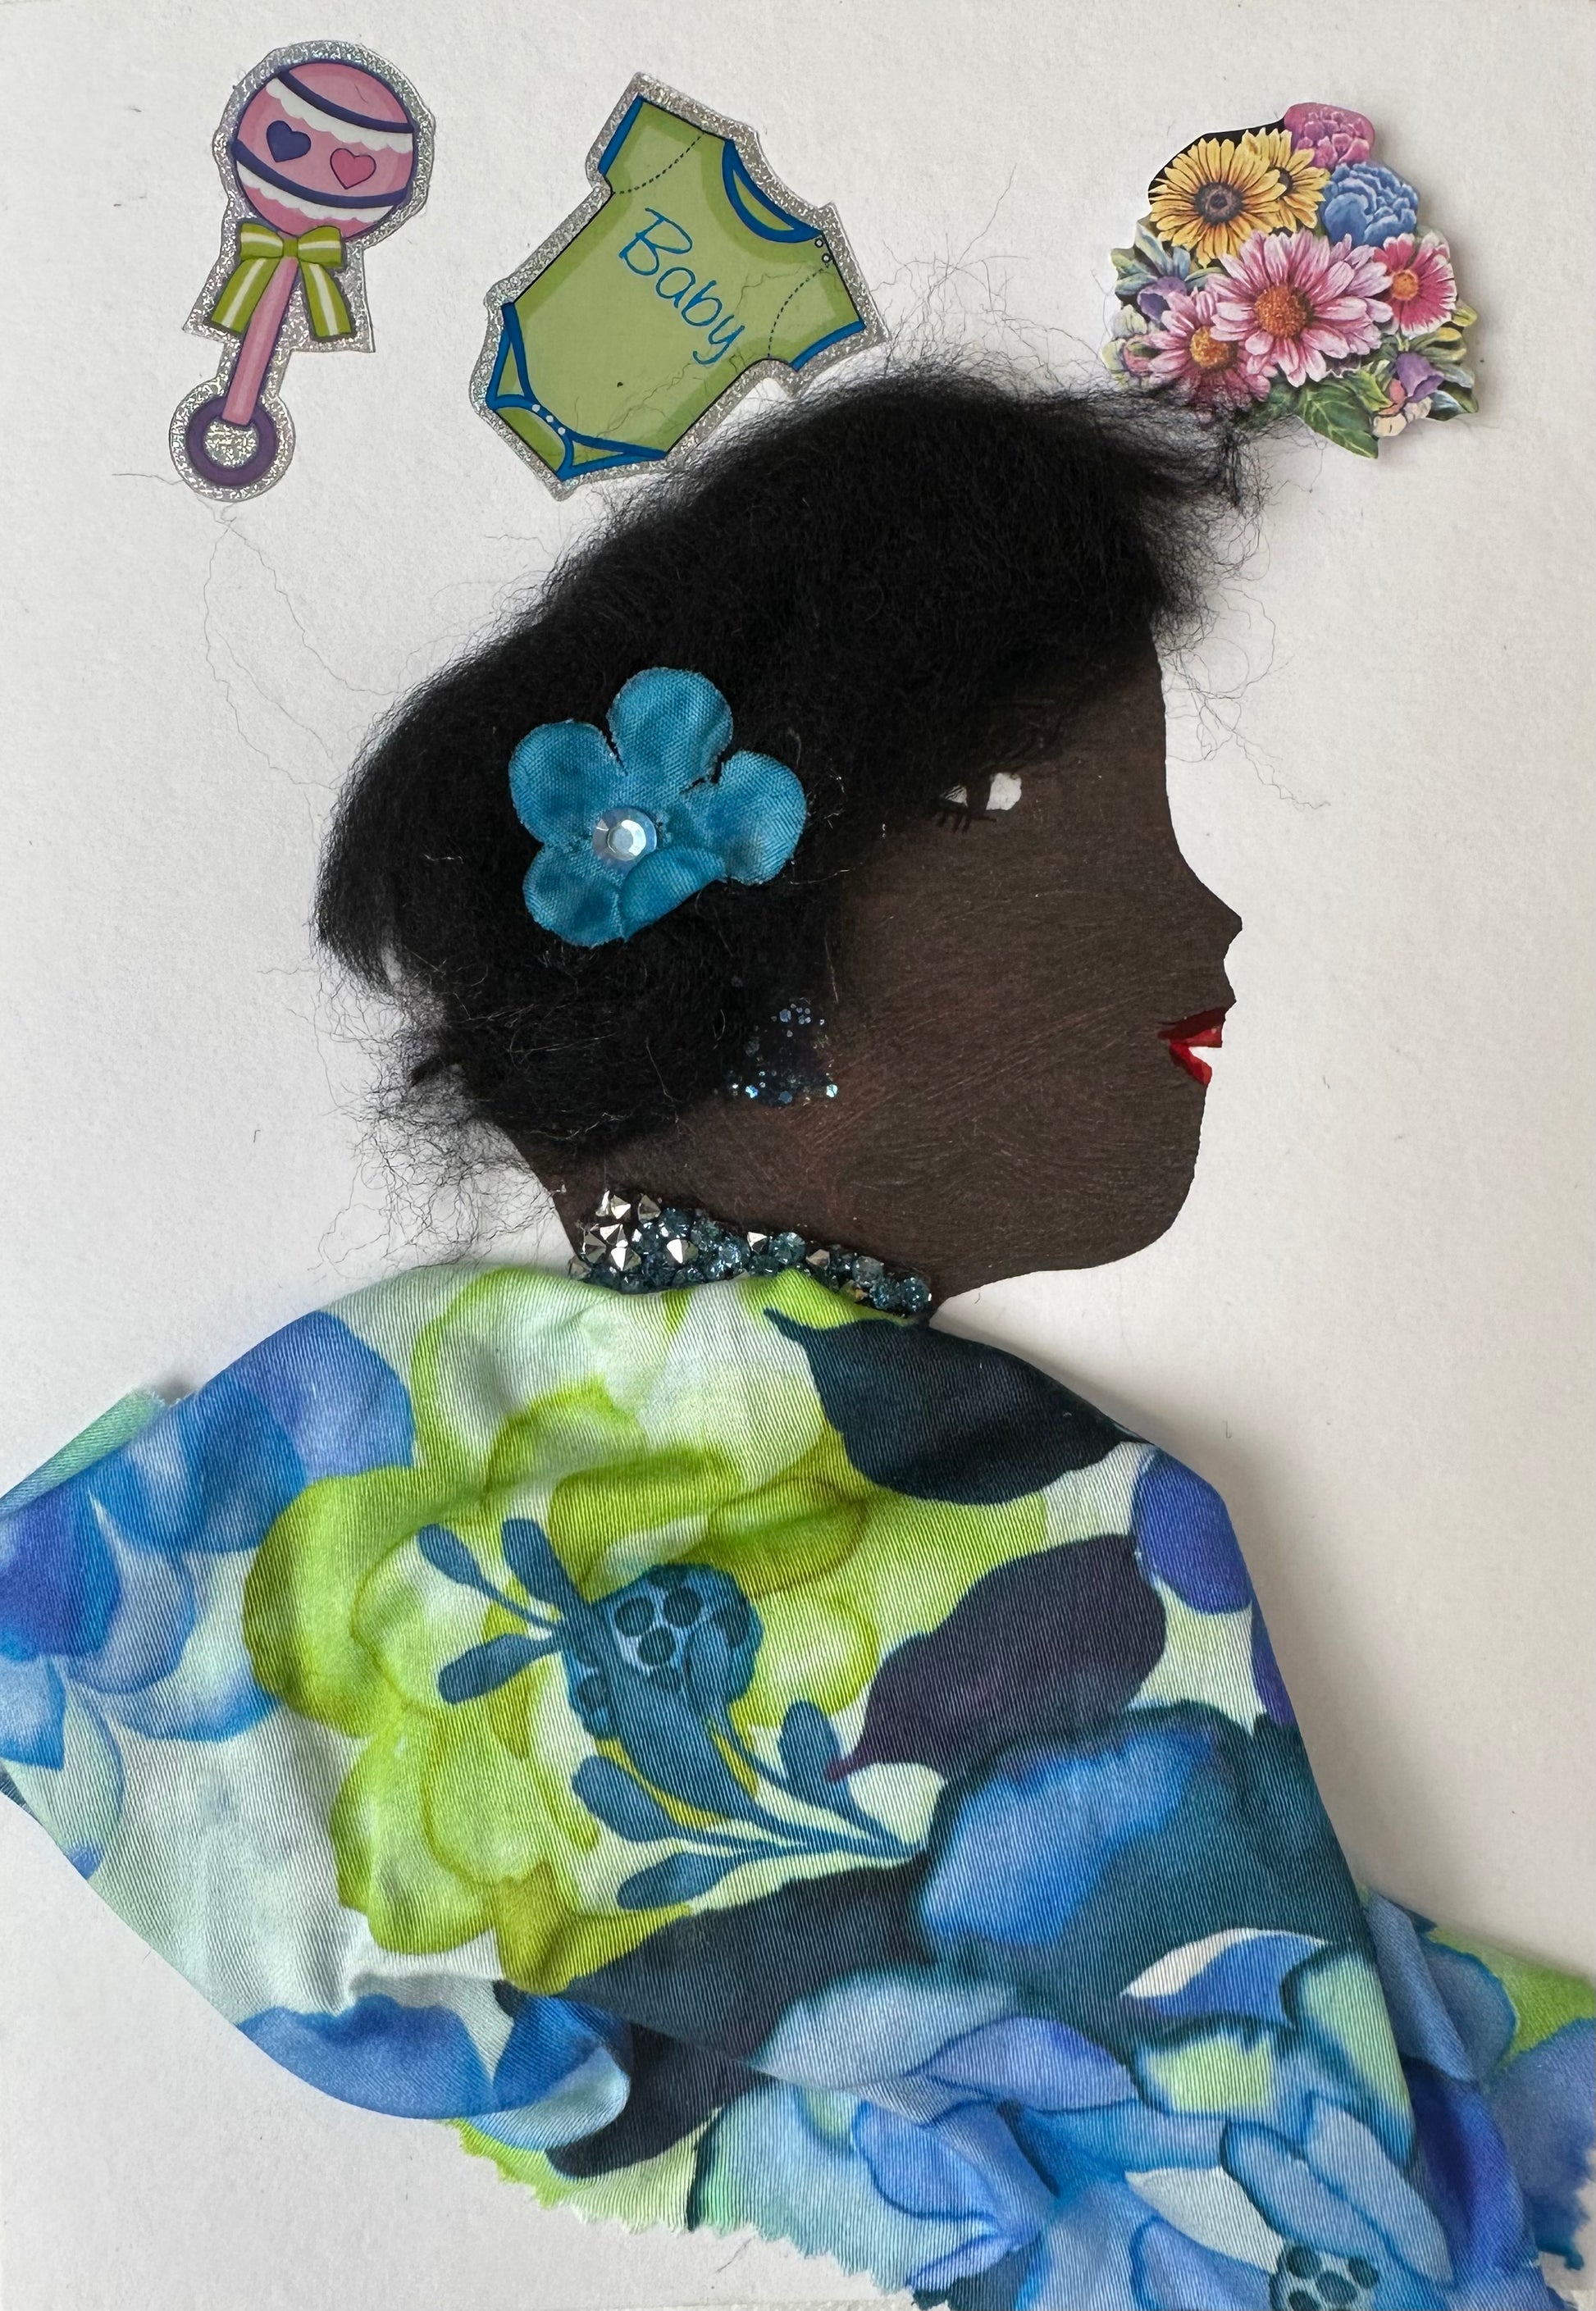 I made this handmade card of a woman wearing a blue and light green floral blouse with a matching blue flower in her hair. The surrounding space contains baby stickers and flowers.